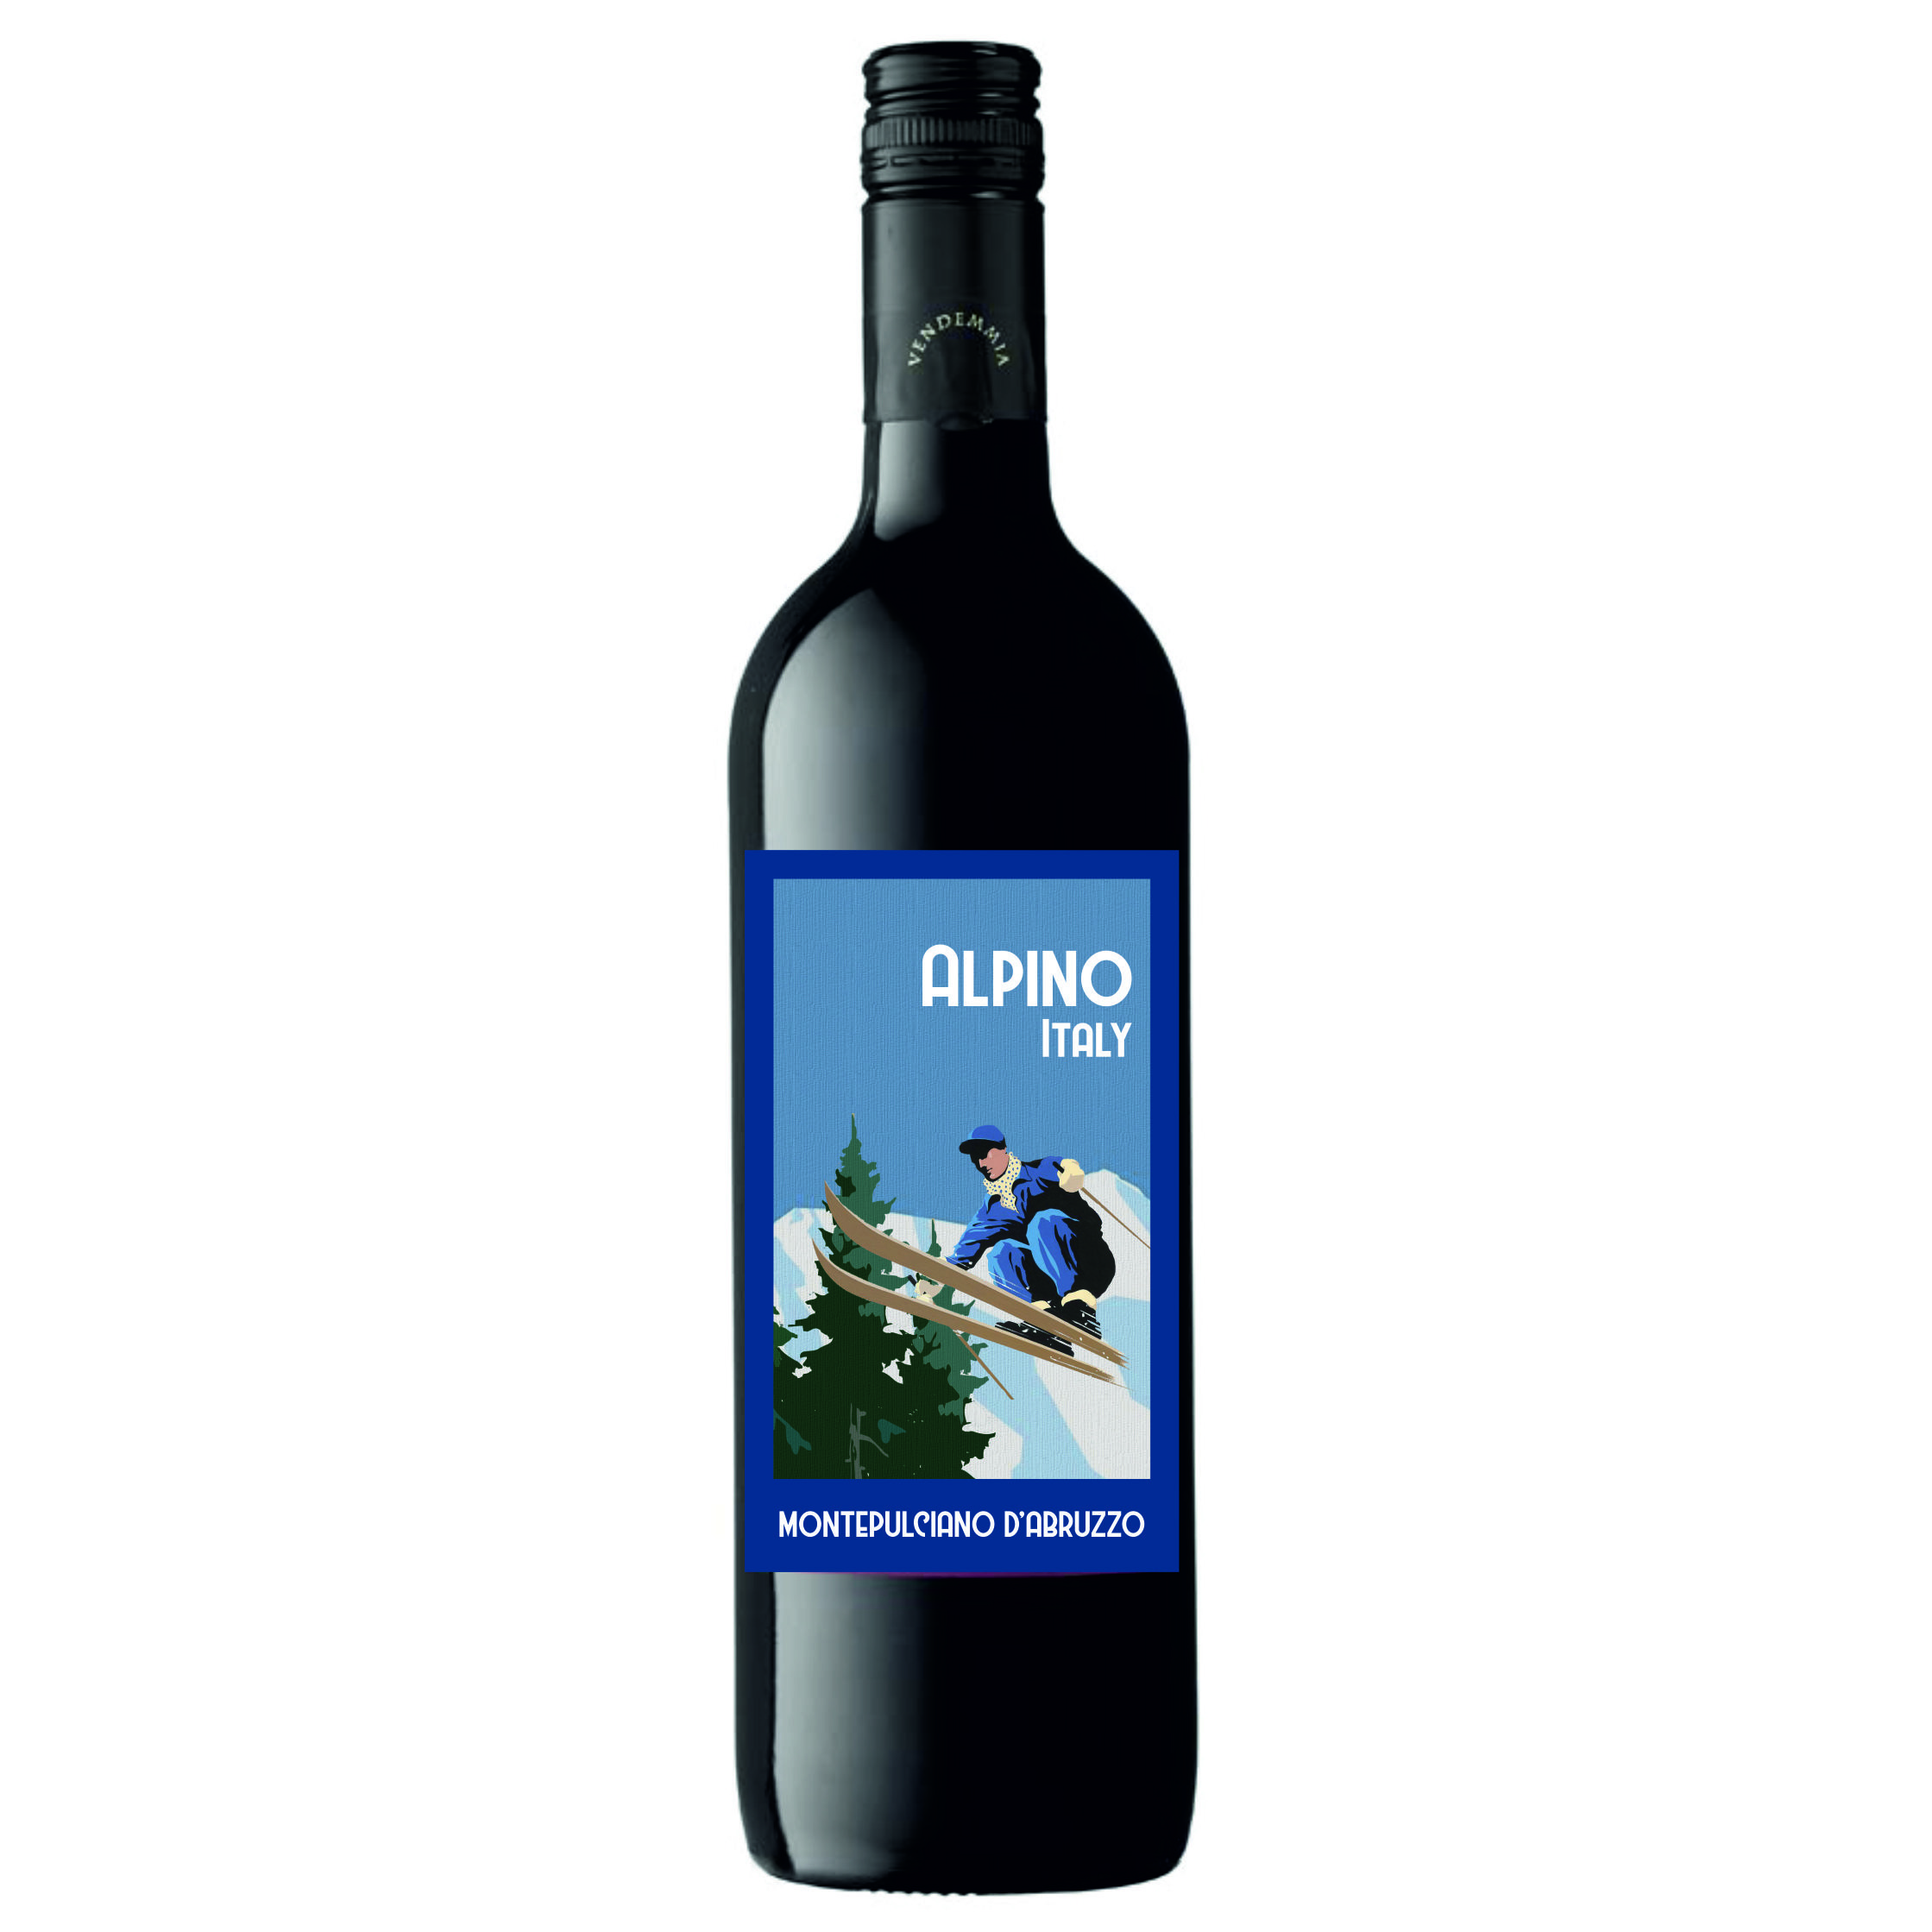 Buy Alpino Montepulciano d'Abruzzo Online With Home Delivery